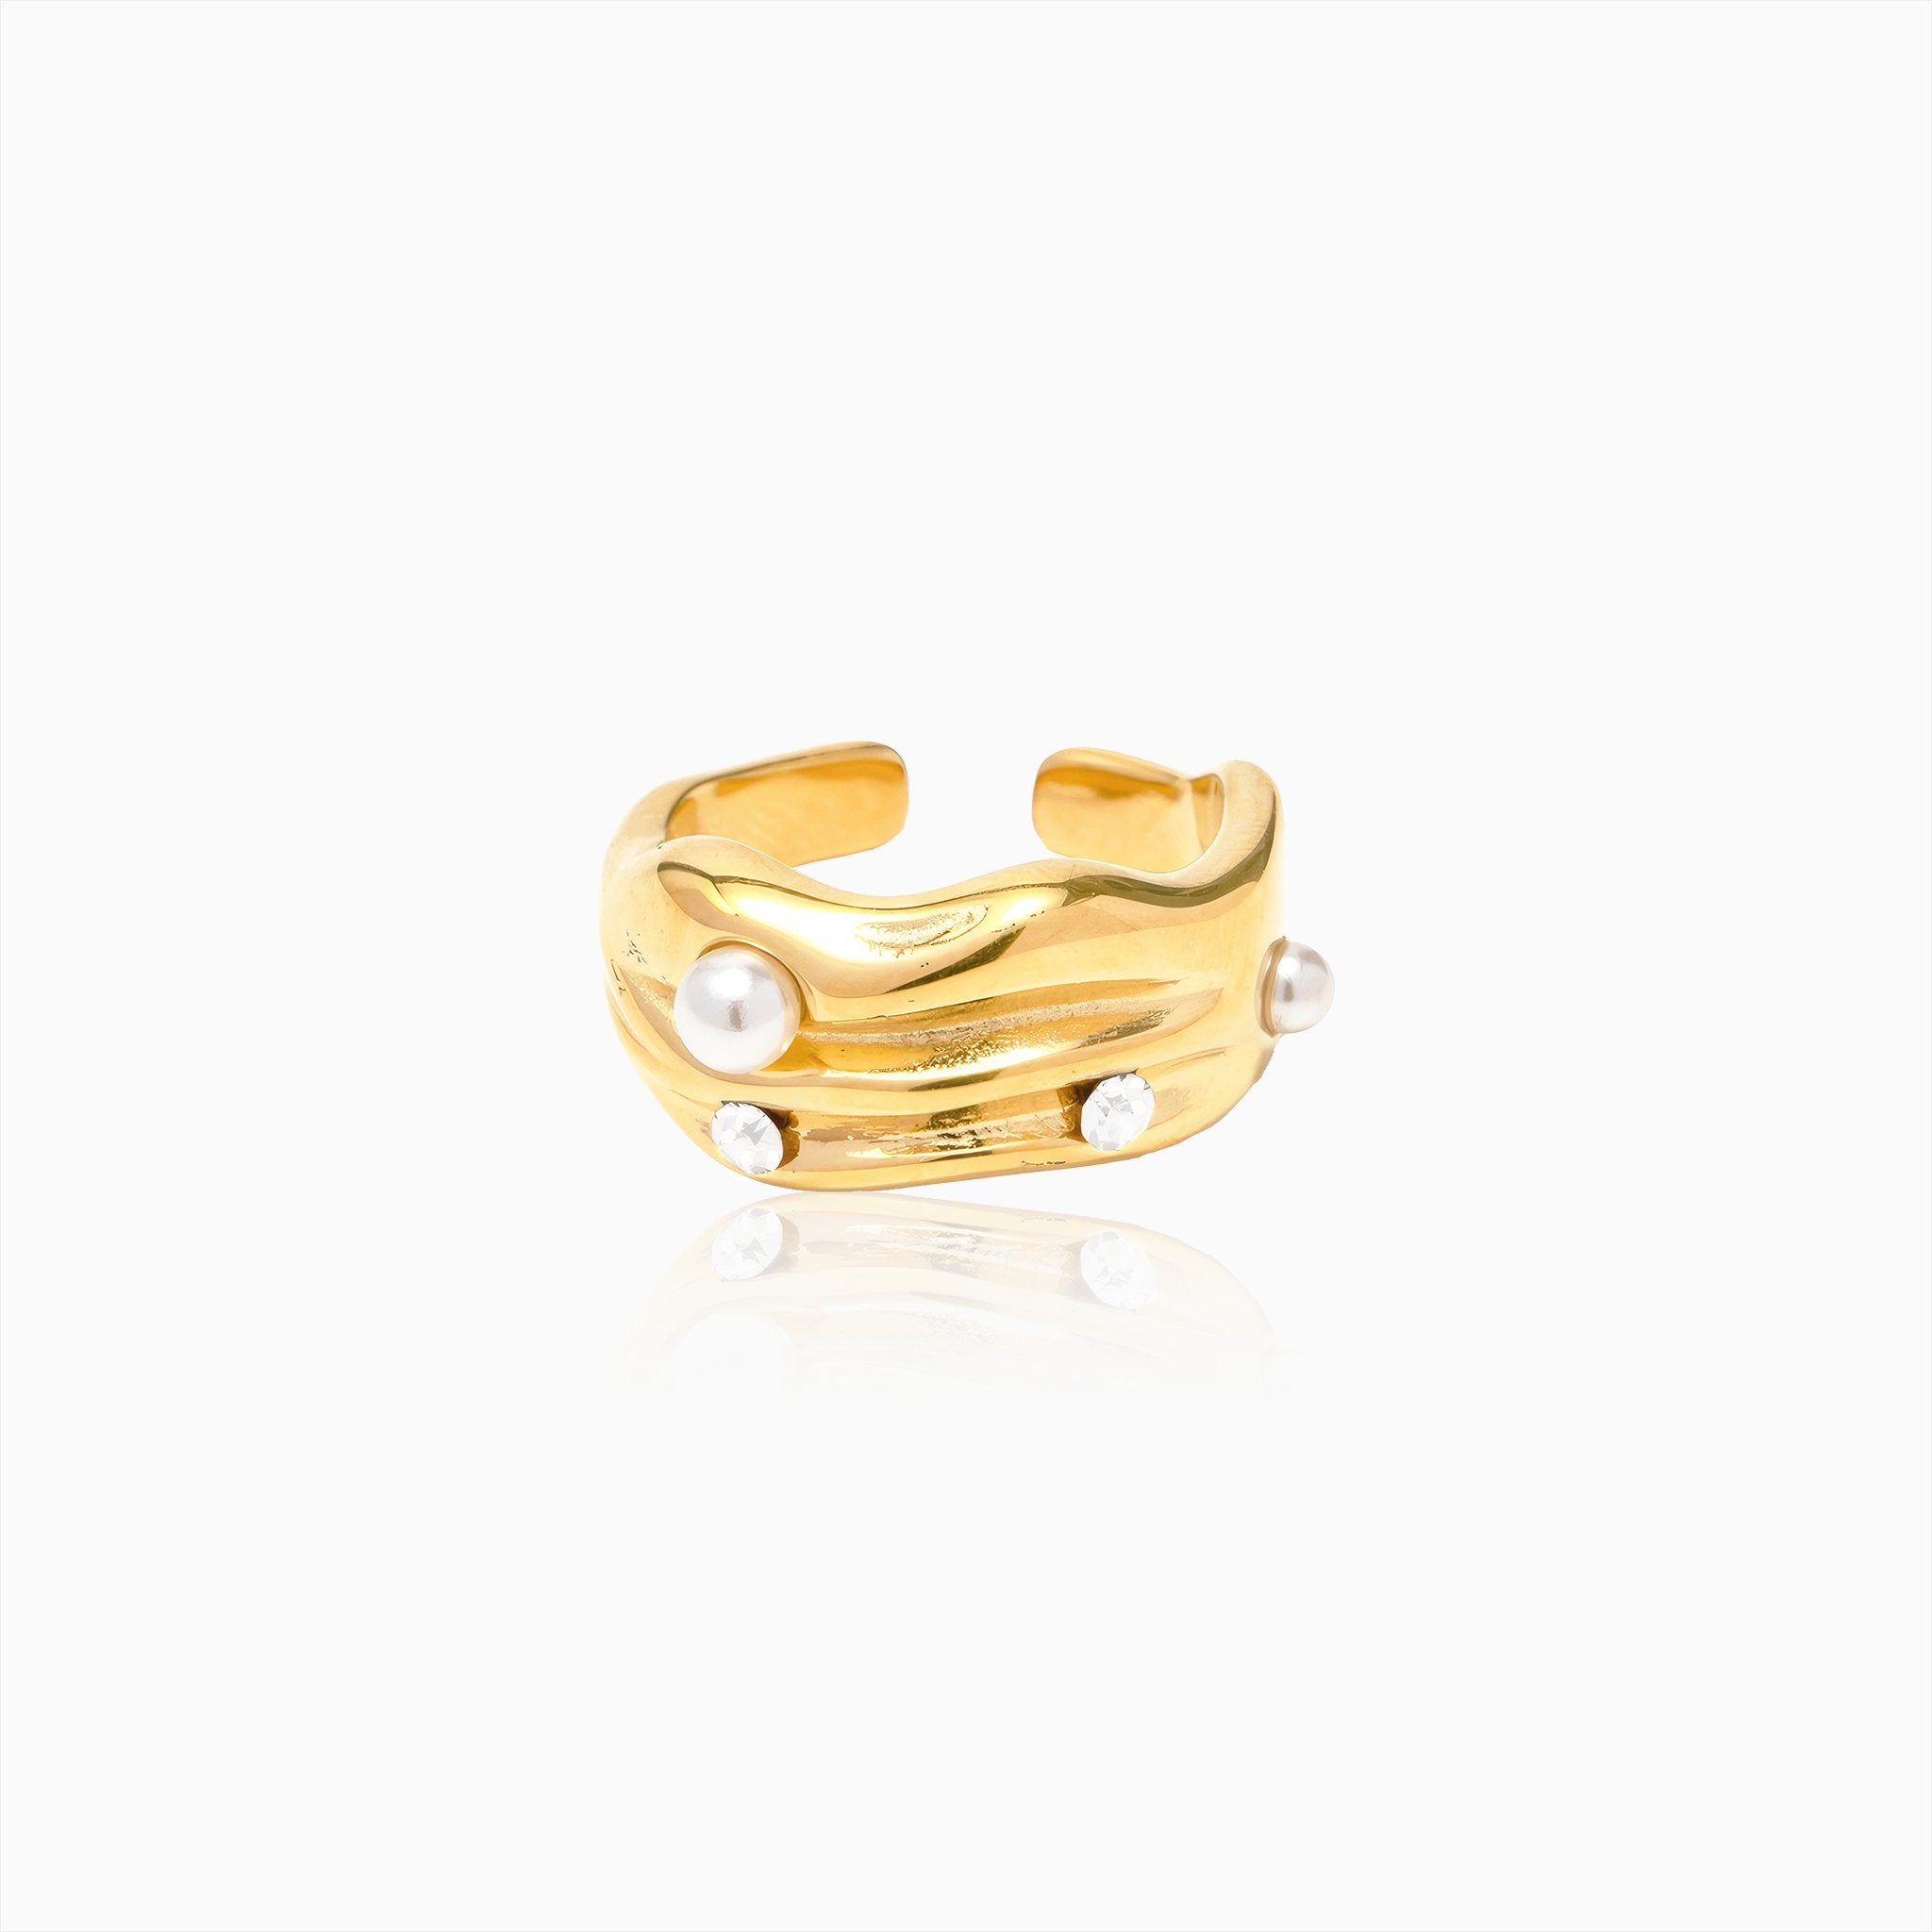 C-Shaped Pearl Inlaid Ring - Nobbier - Ring - 18K Gold And Titanium PVD Coated Jewelry